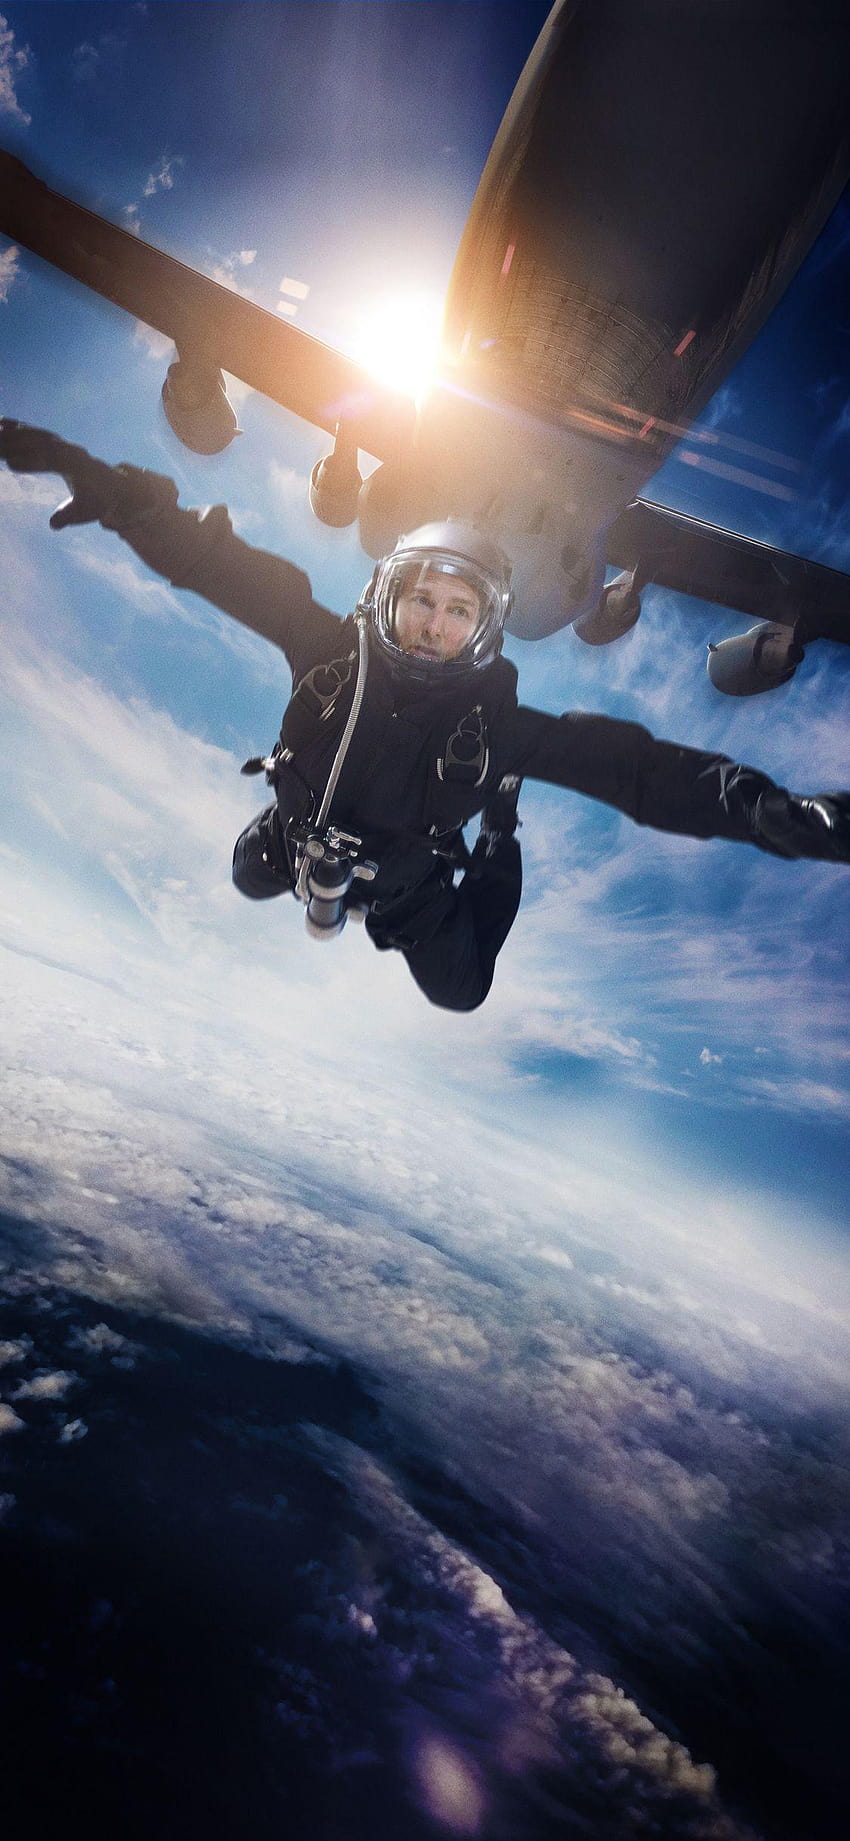 1125x2436 Mission Impossible Fallout Jumping Out Of Plane Poster, Mission Impossible iPhone HD-Handy-Hintergrundbild